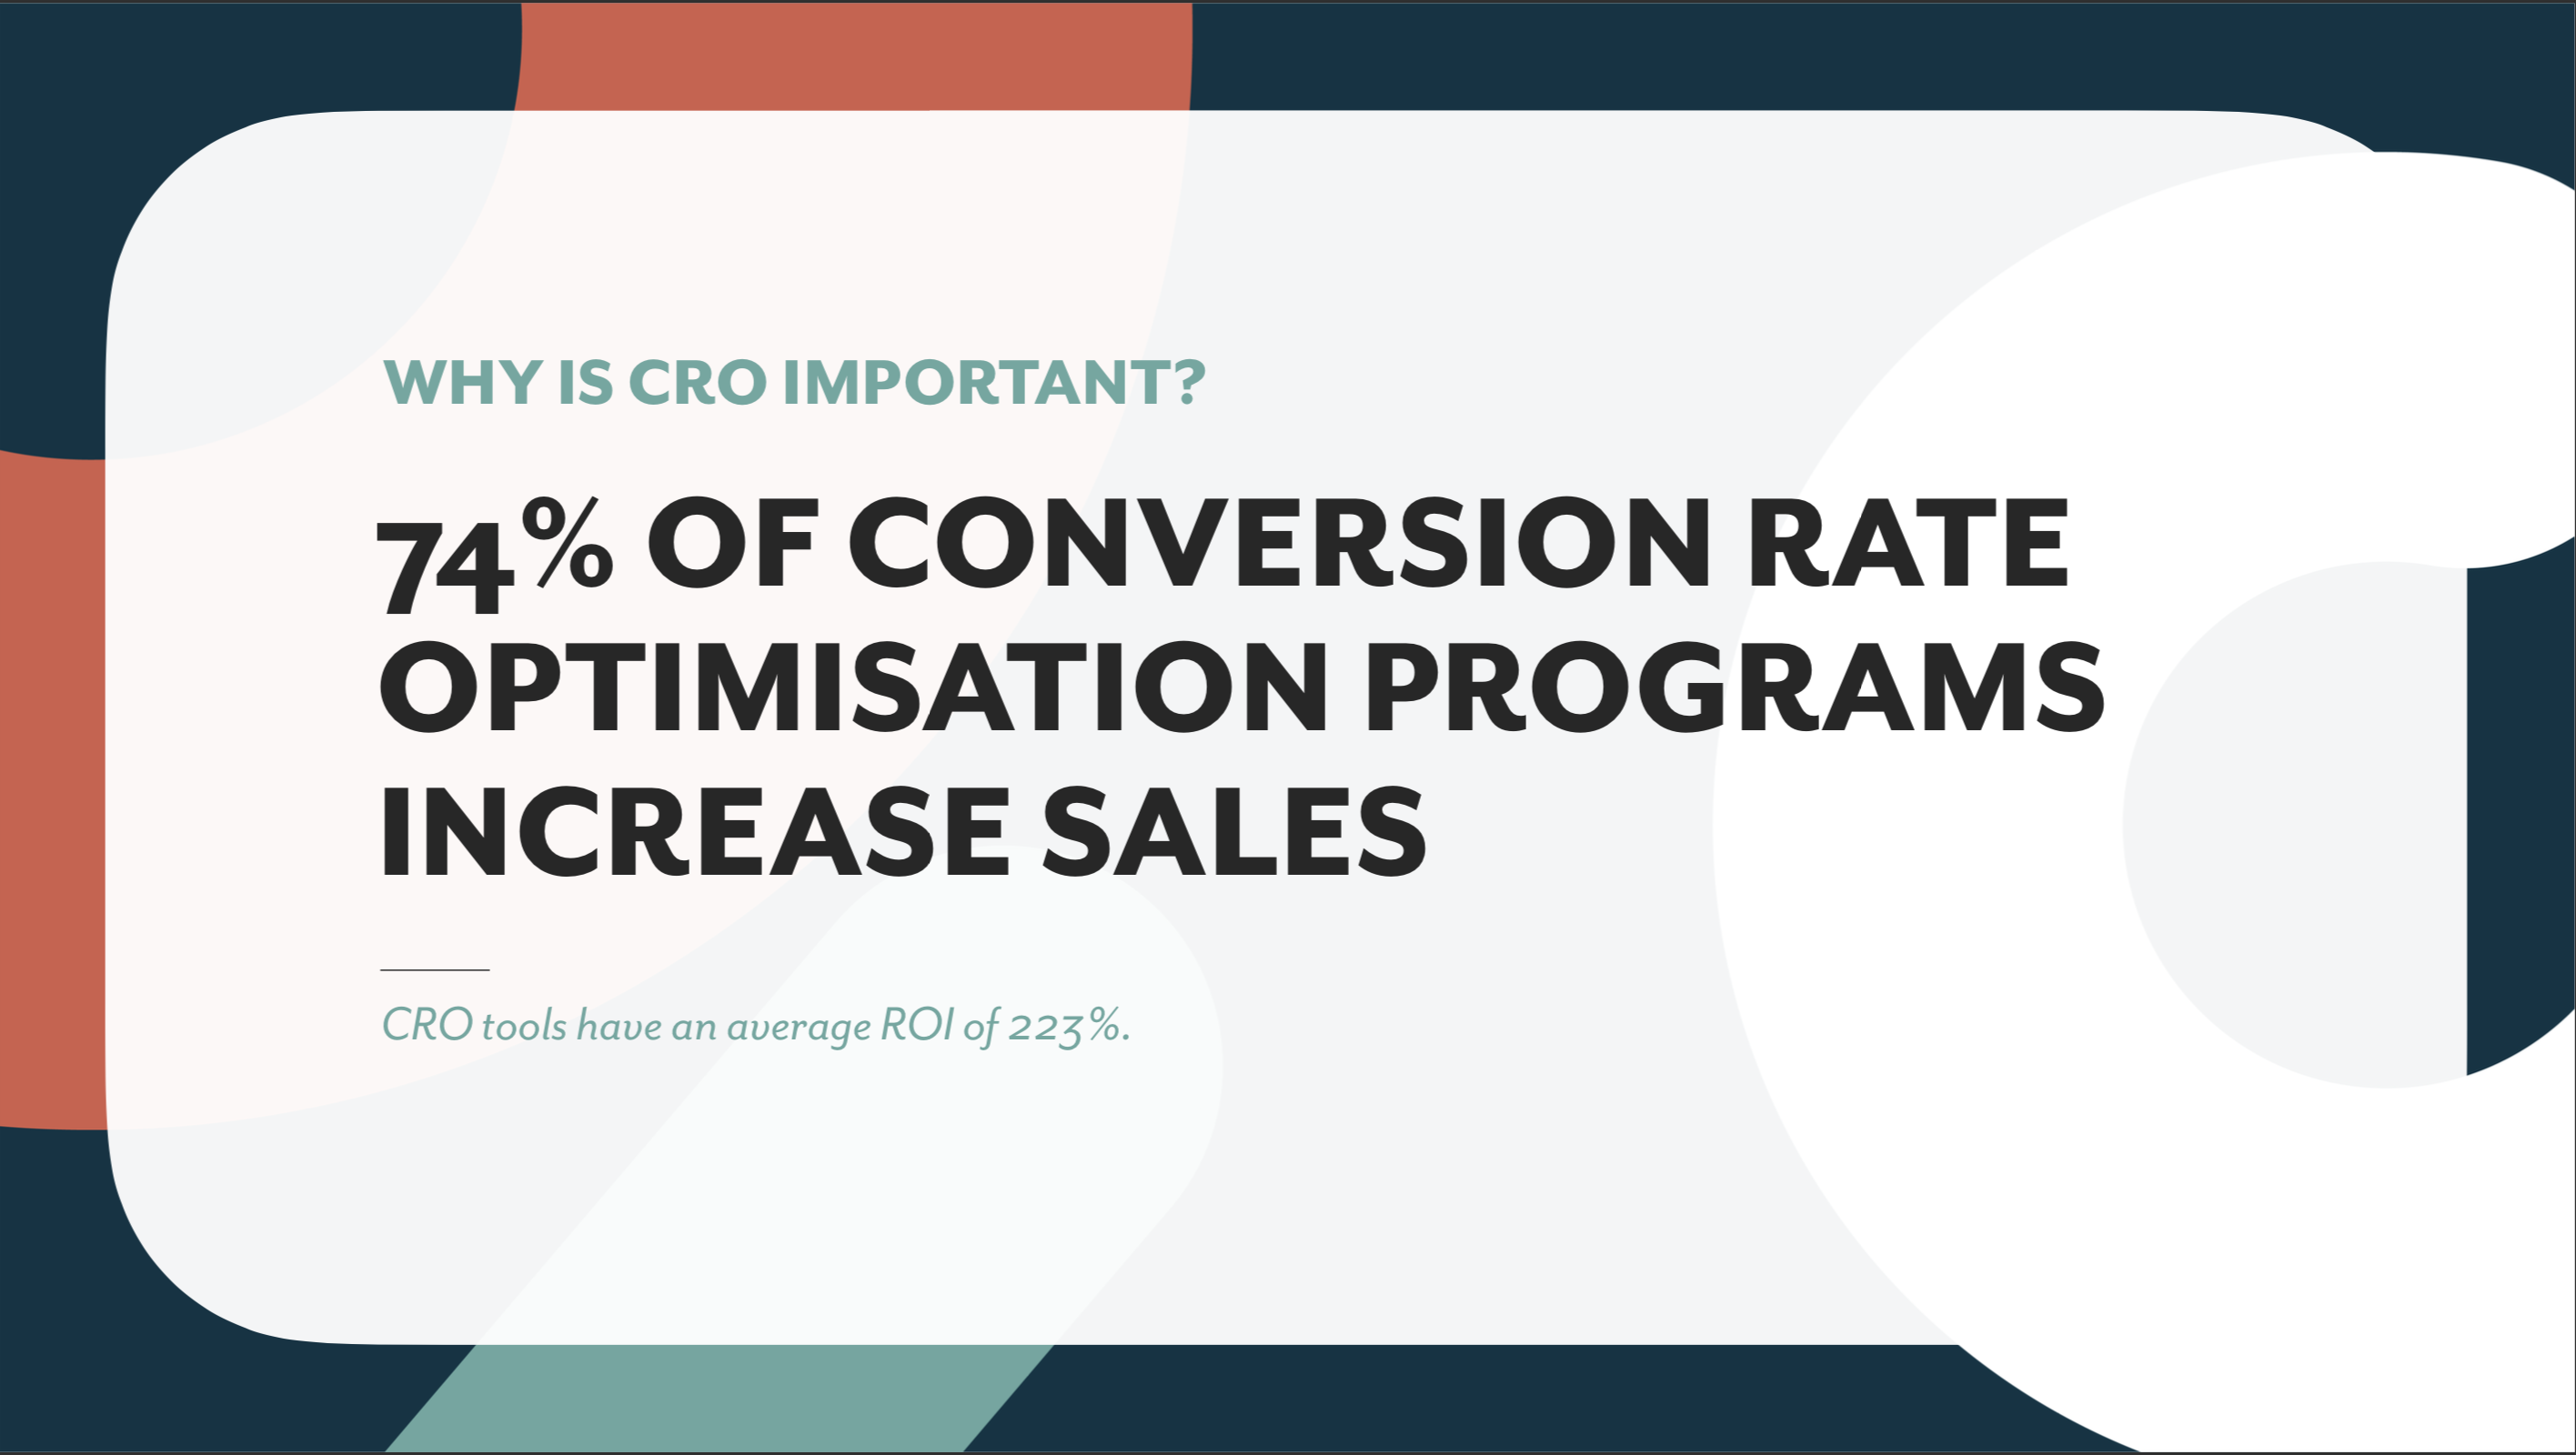 Conversion Rate Optimisation is important